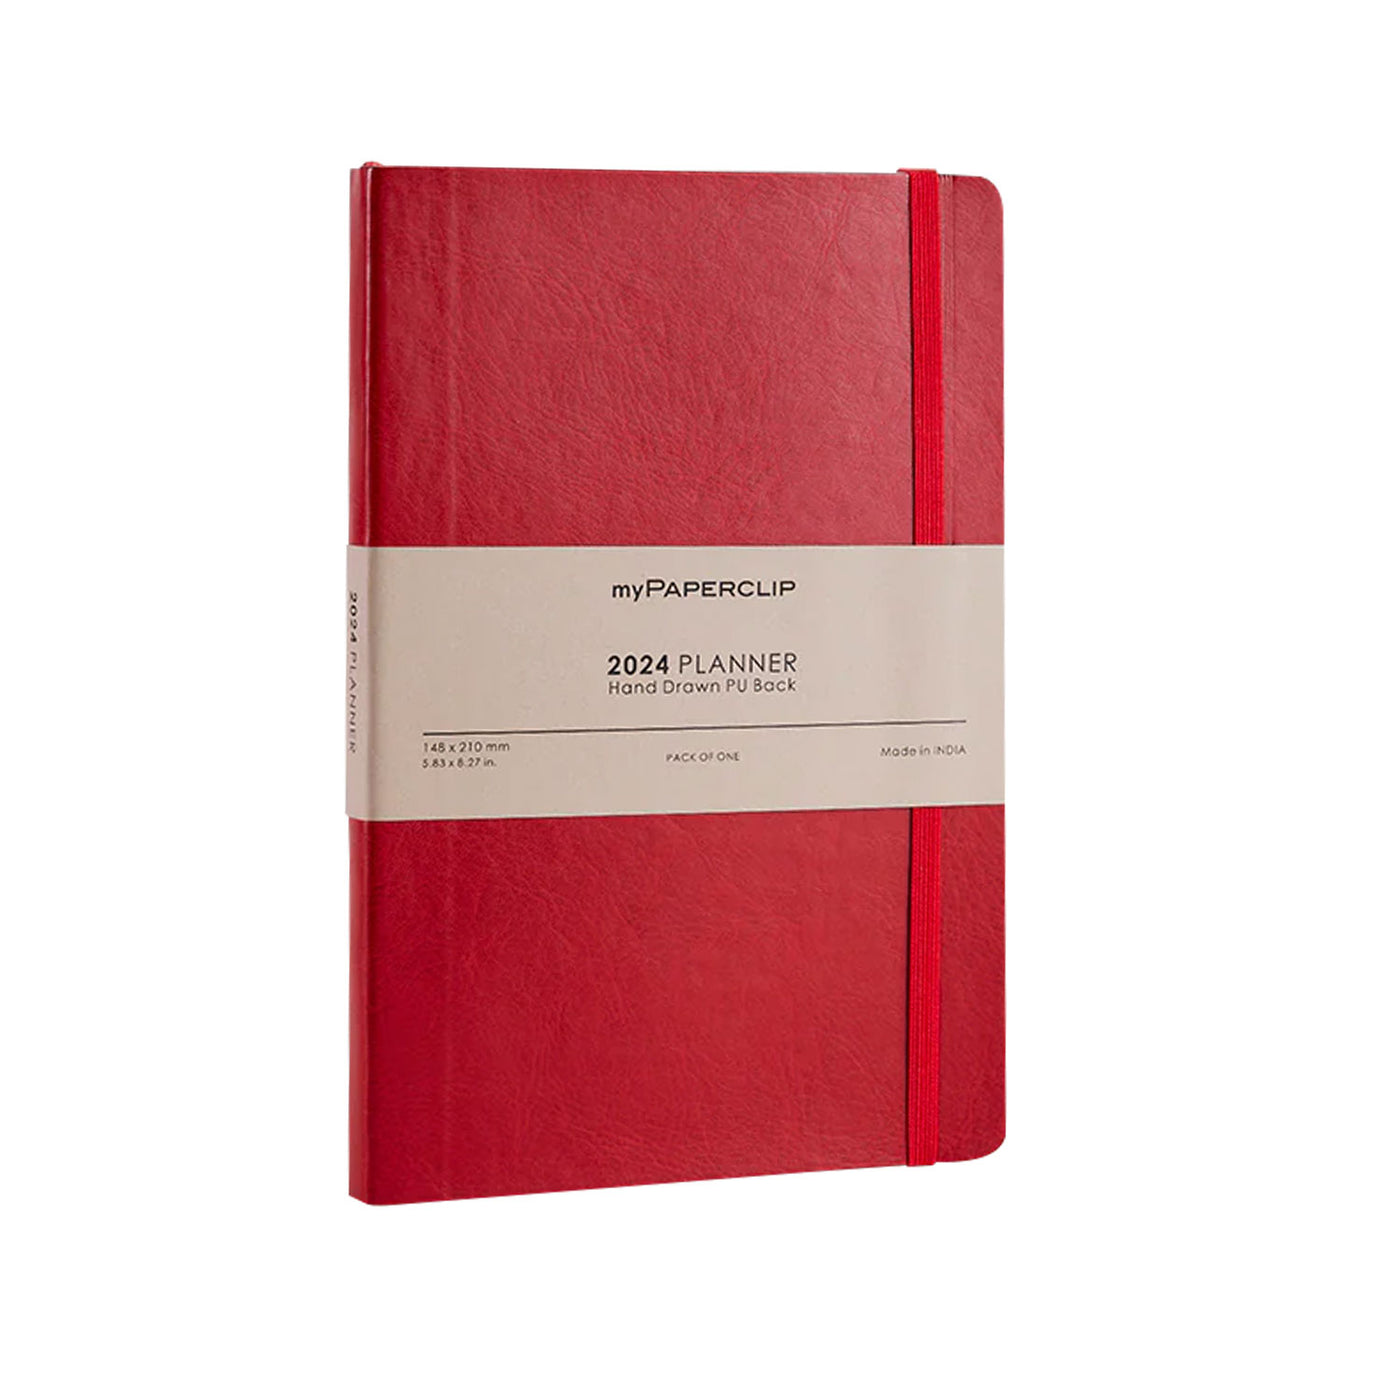 myPAPERCLIP R2 2024 Weekly Planner - Red 1